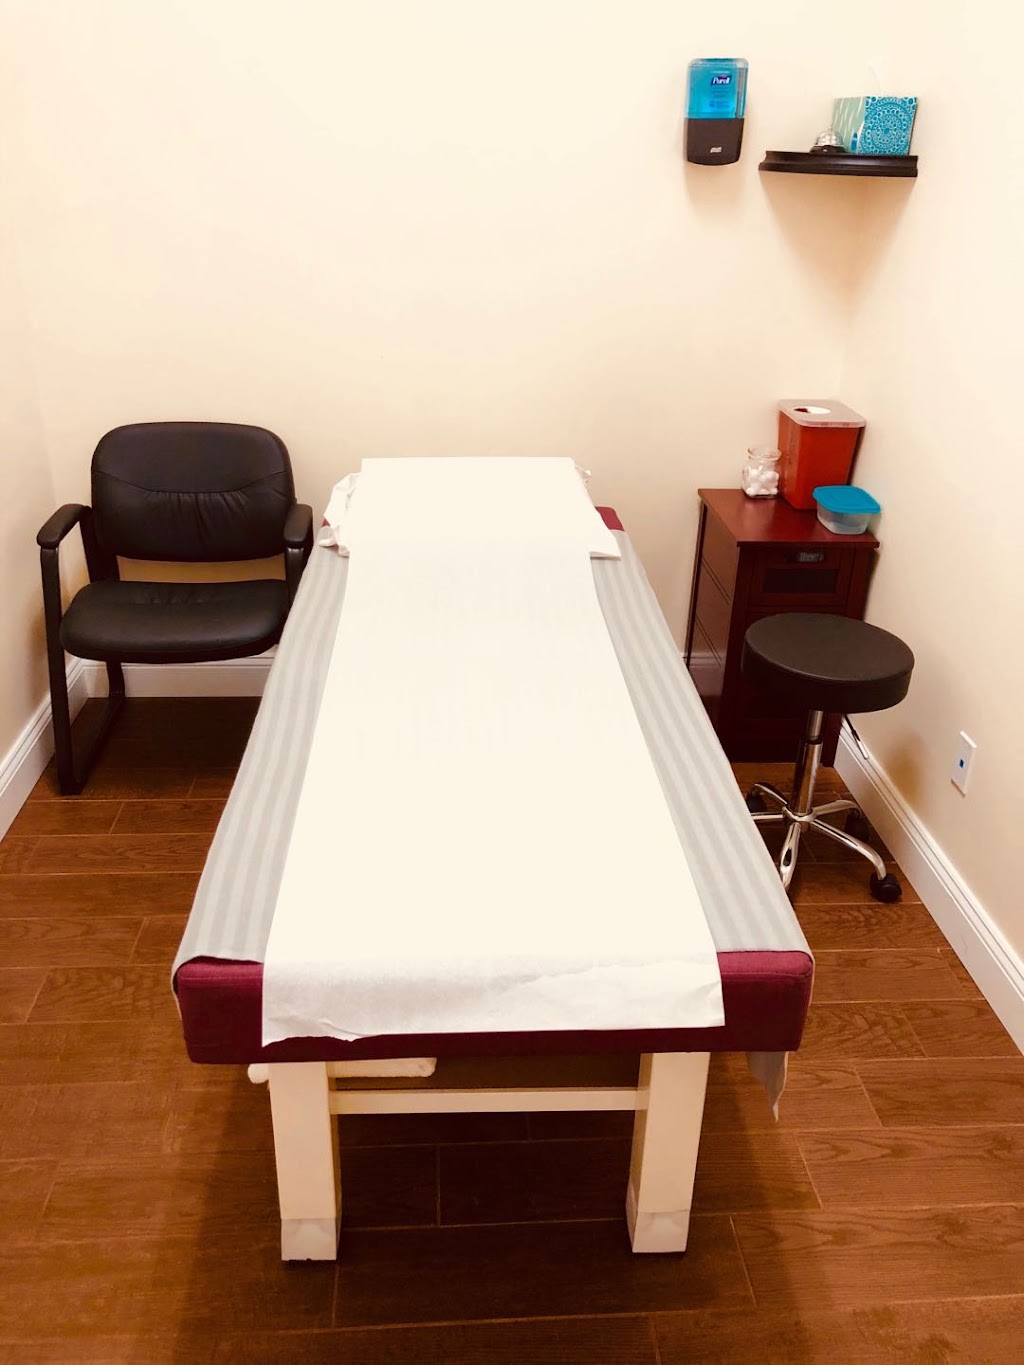 Talented Hands Physical Therapy & Acupuncture, P.C. | 524 E Meadow Ave, East Meadow, NY 11554 | Phone: (516) 506-7018